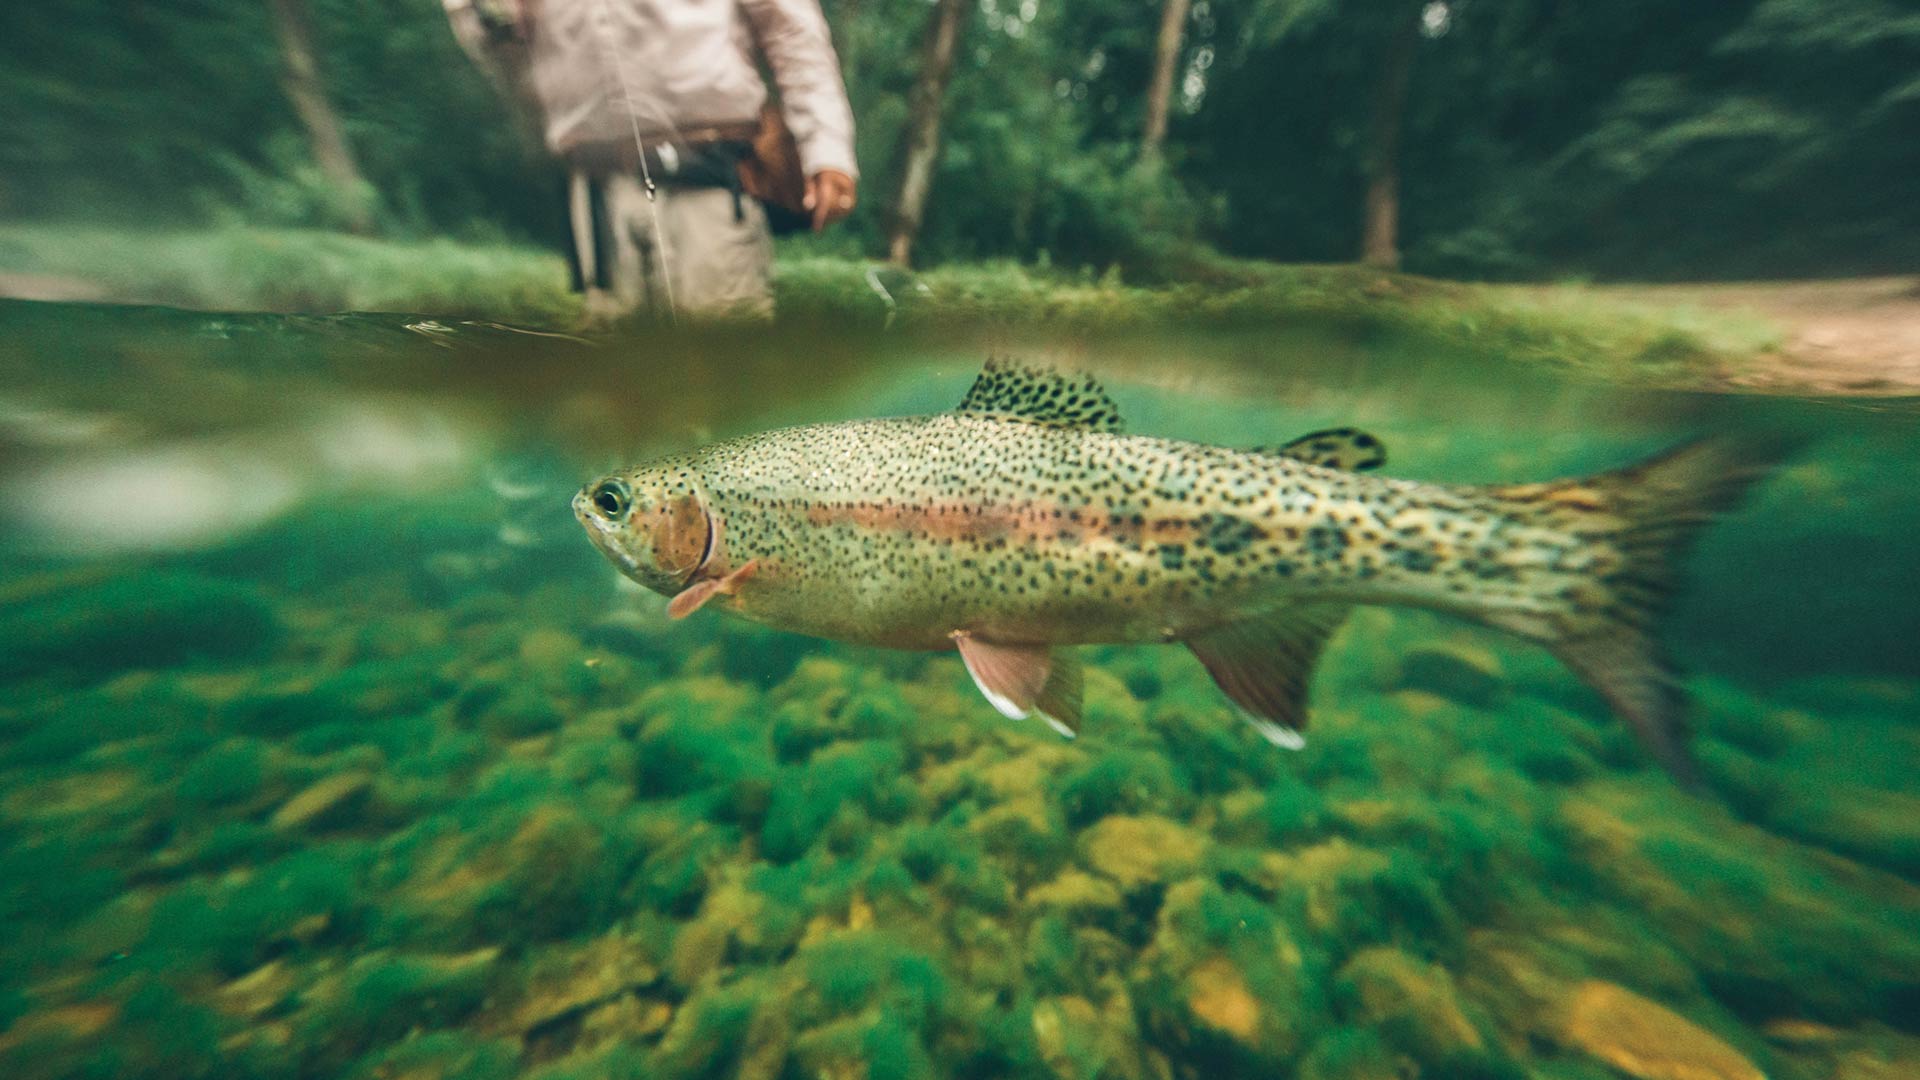 Fly Fishing & The Practice of Law